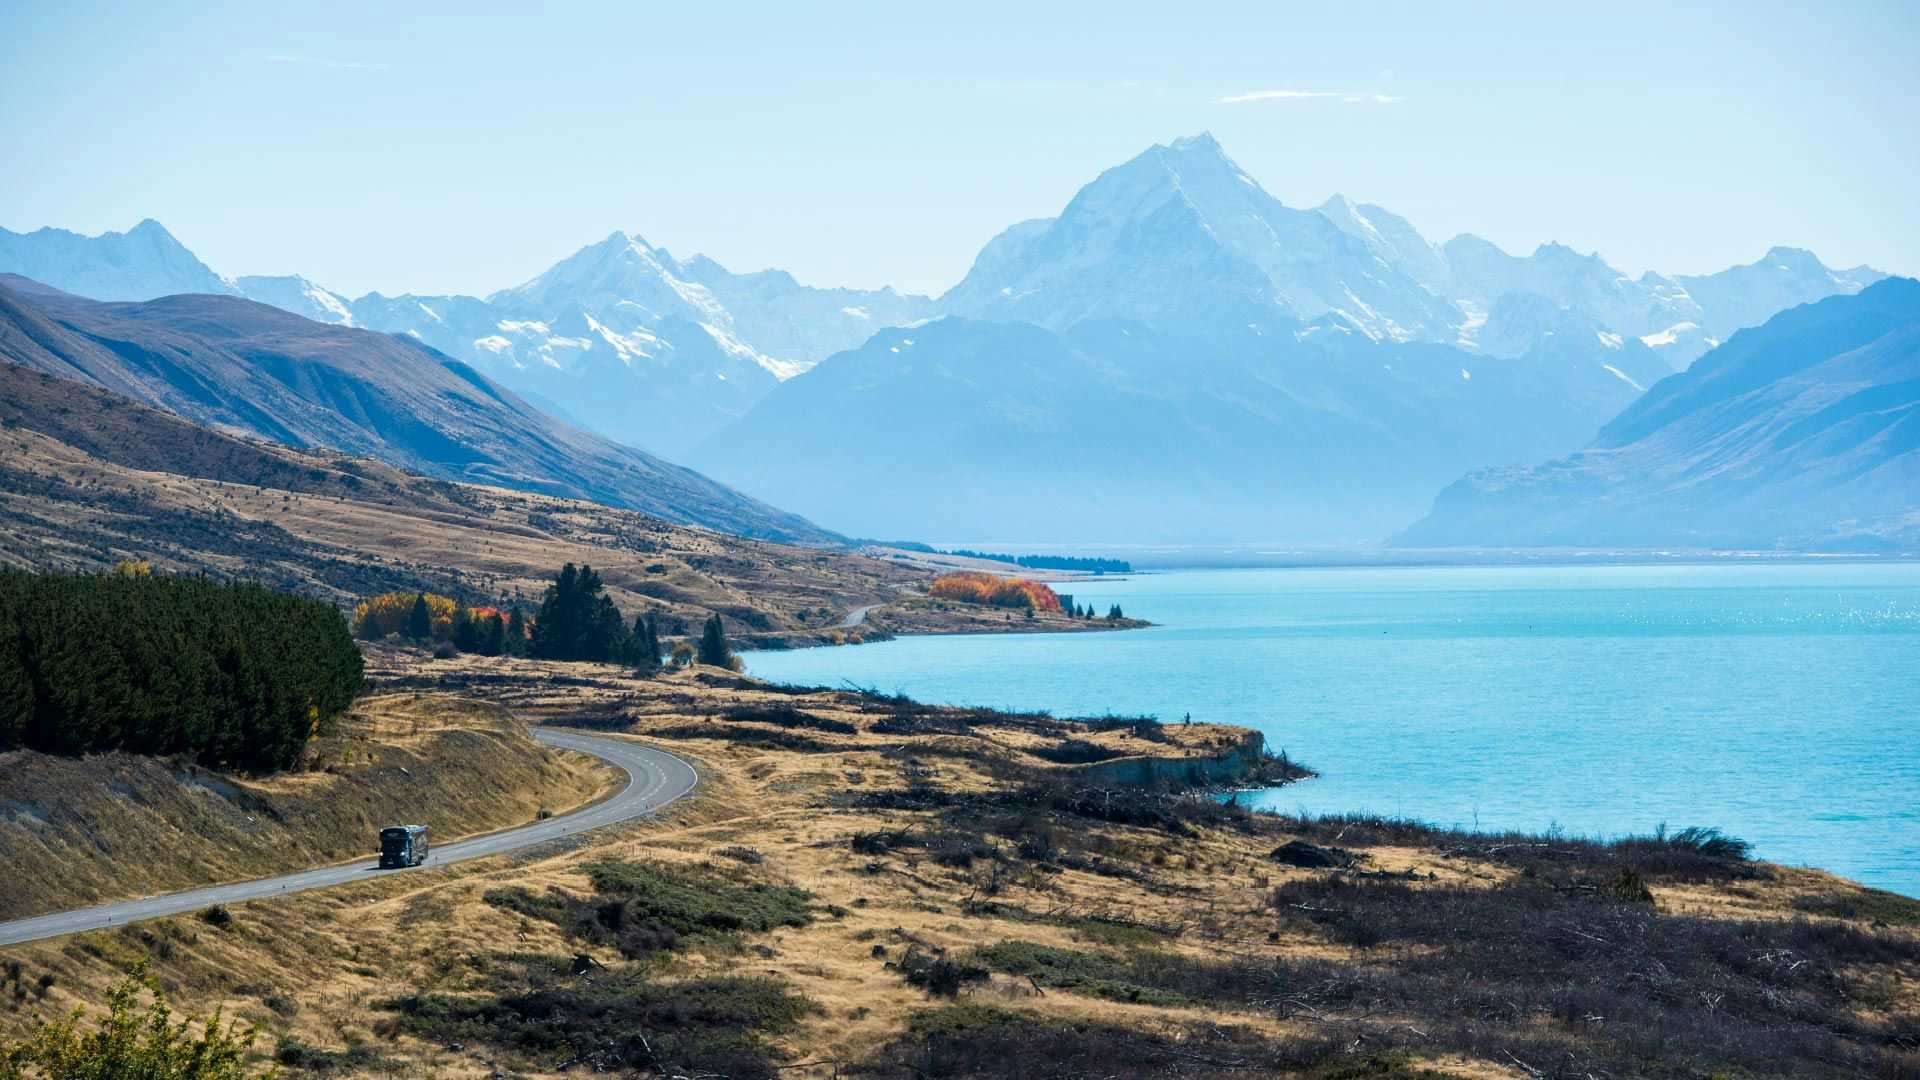 View of the Southerns Alps and Lake Pukaki